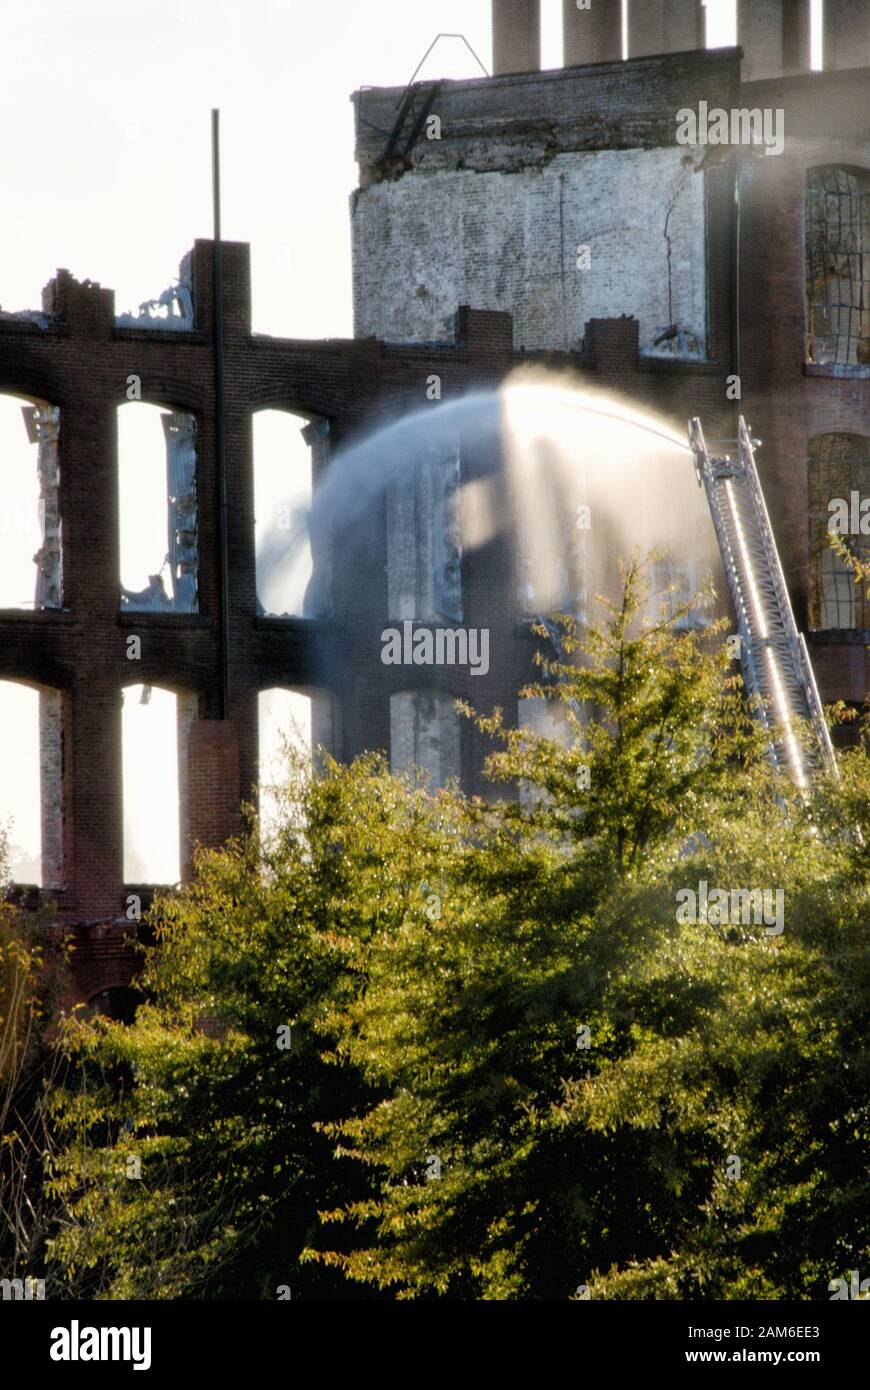 The fire department is extinguishing fires in a burnt out brick building which was an historic textile mill in Columbus GA. Stock Photo